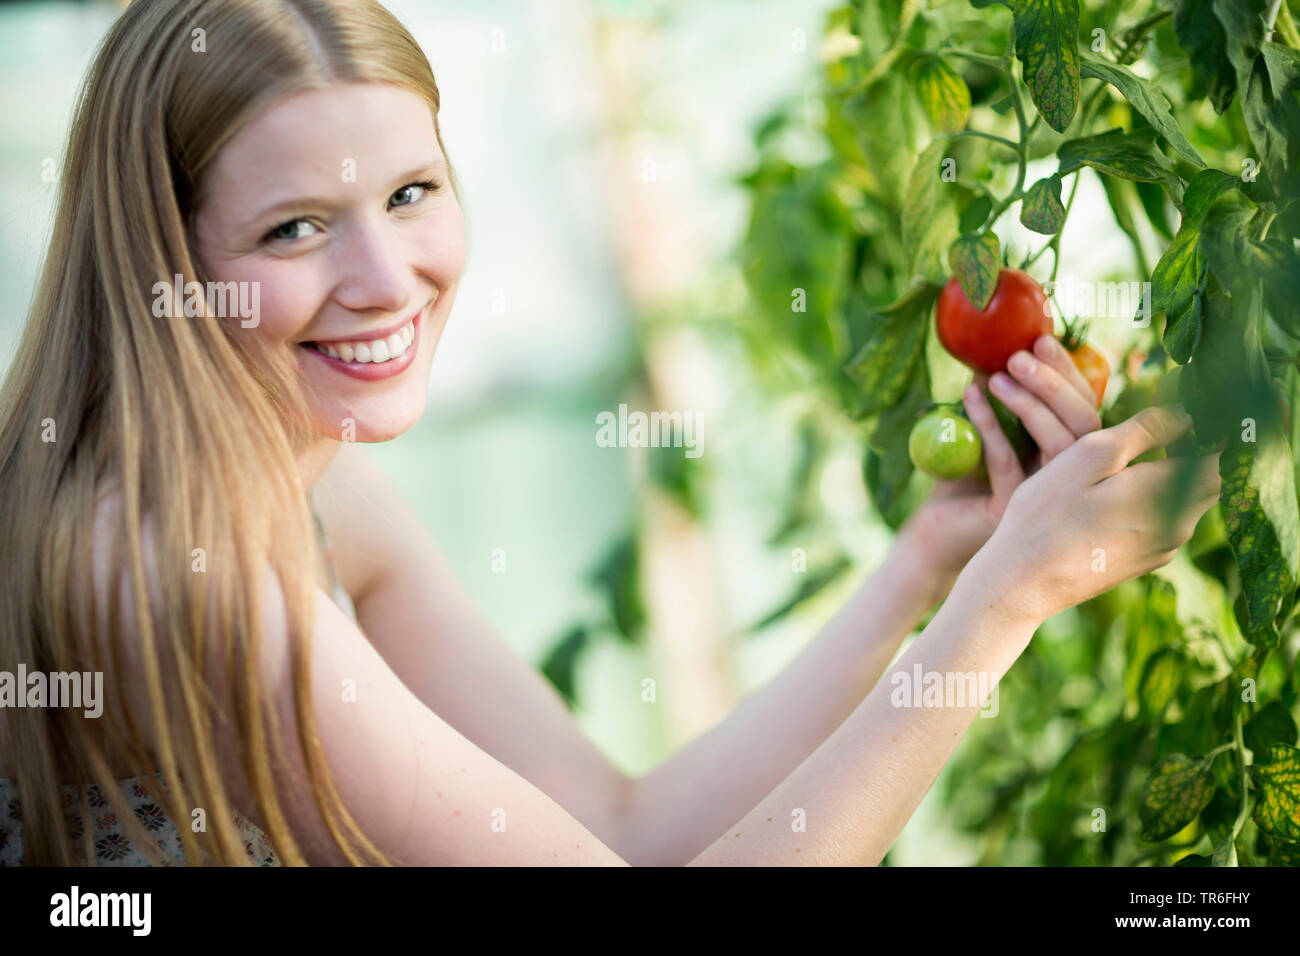 garden tomato (Solanum lycopersicum, Lycopersicon esculentum), young woman being happy about a ripe tomato at a tomato plant, Germany Stock Photo